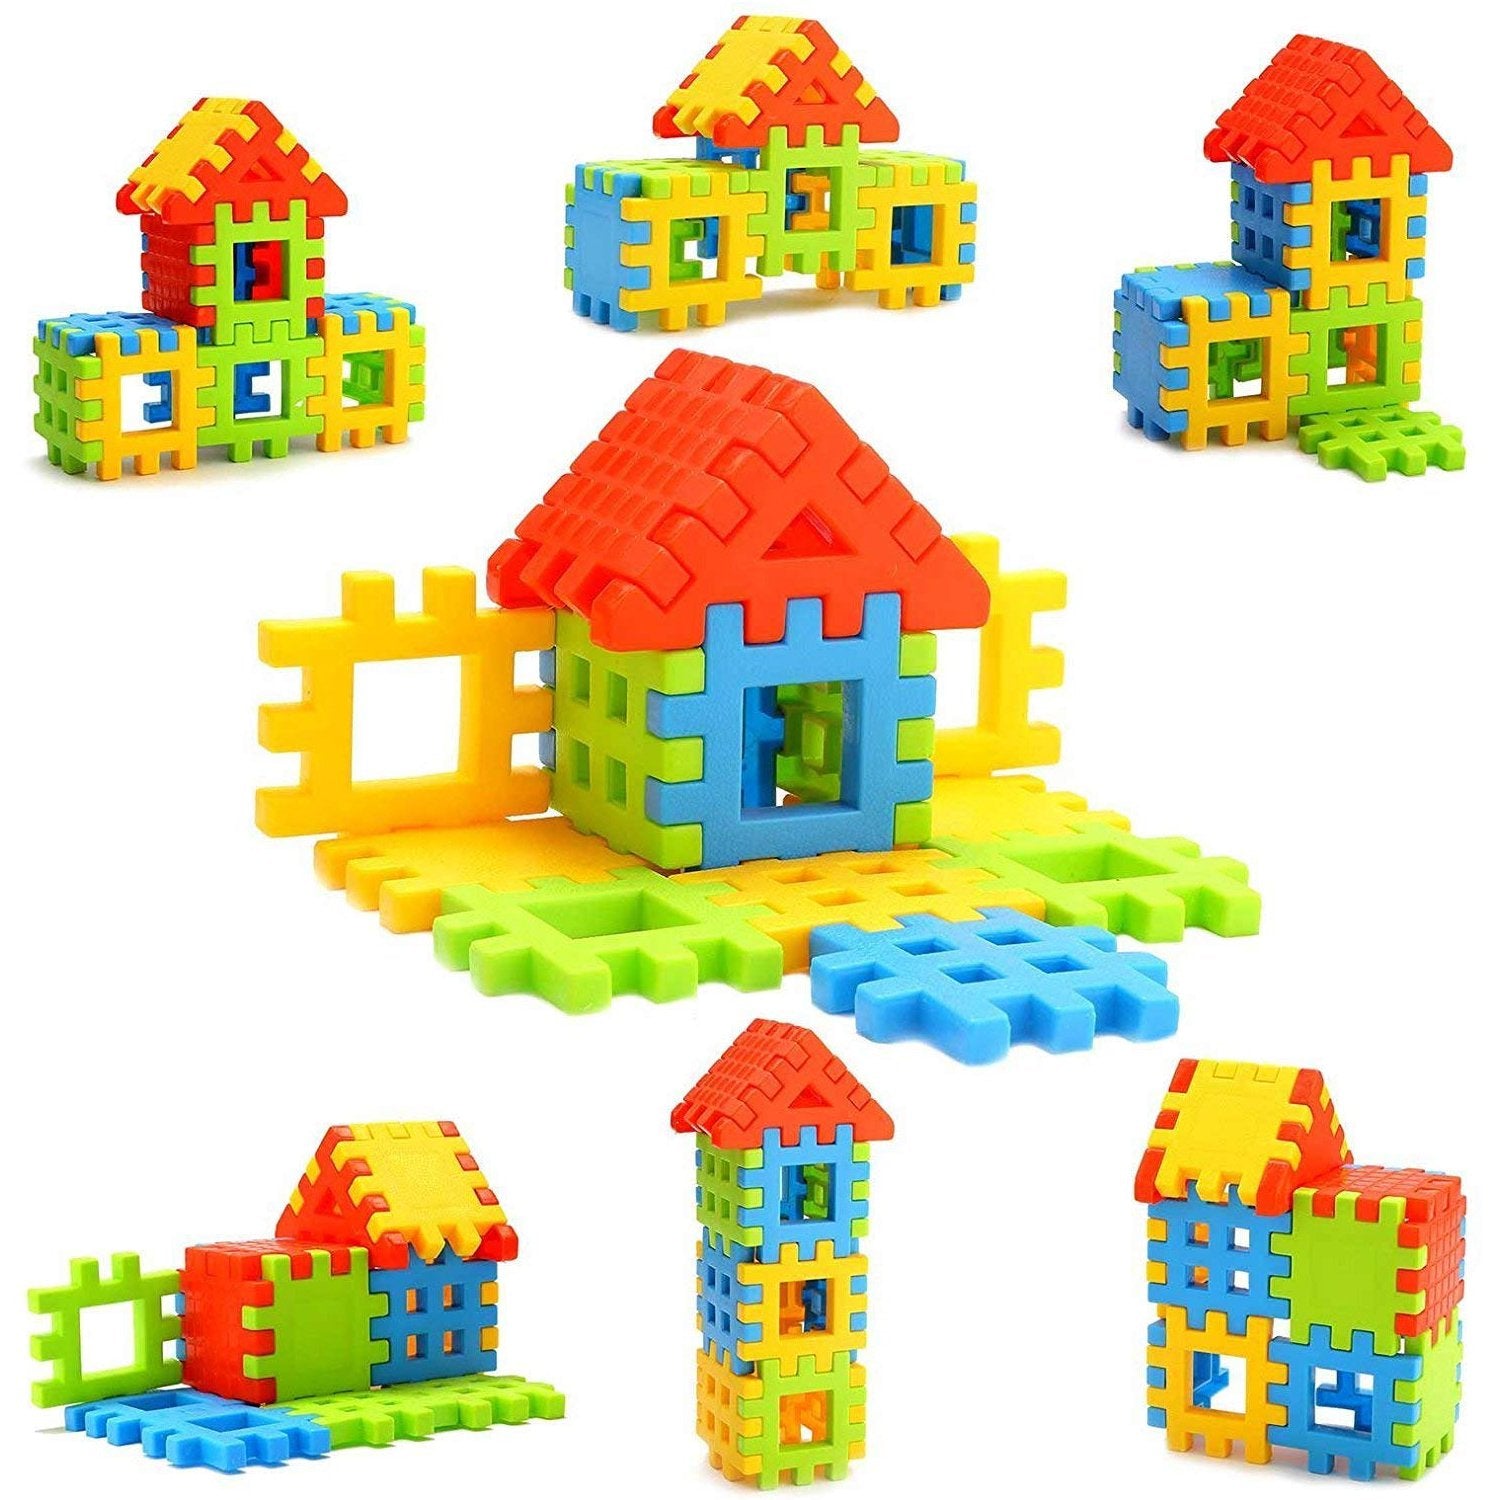 3911A 176PCS HOUSE BLOCKS TOY USED IN ALL KINDS FOR ENJOYING PURPOSES 